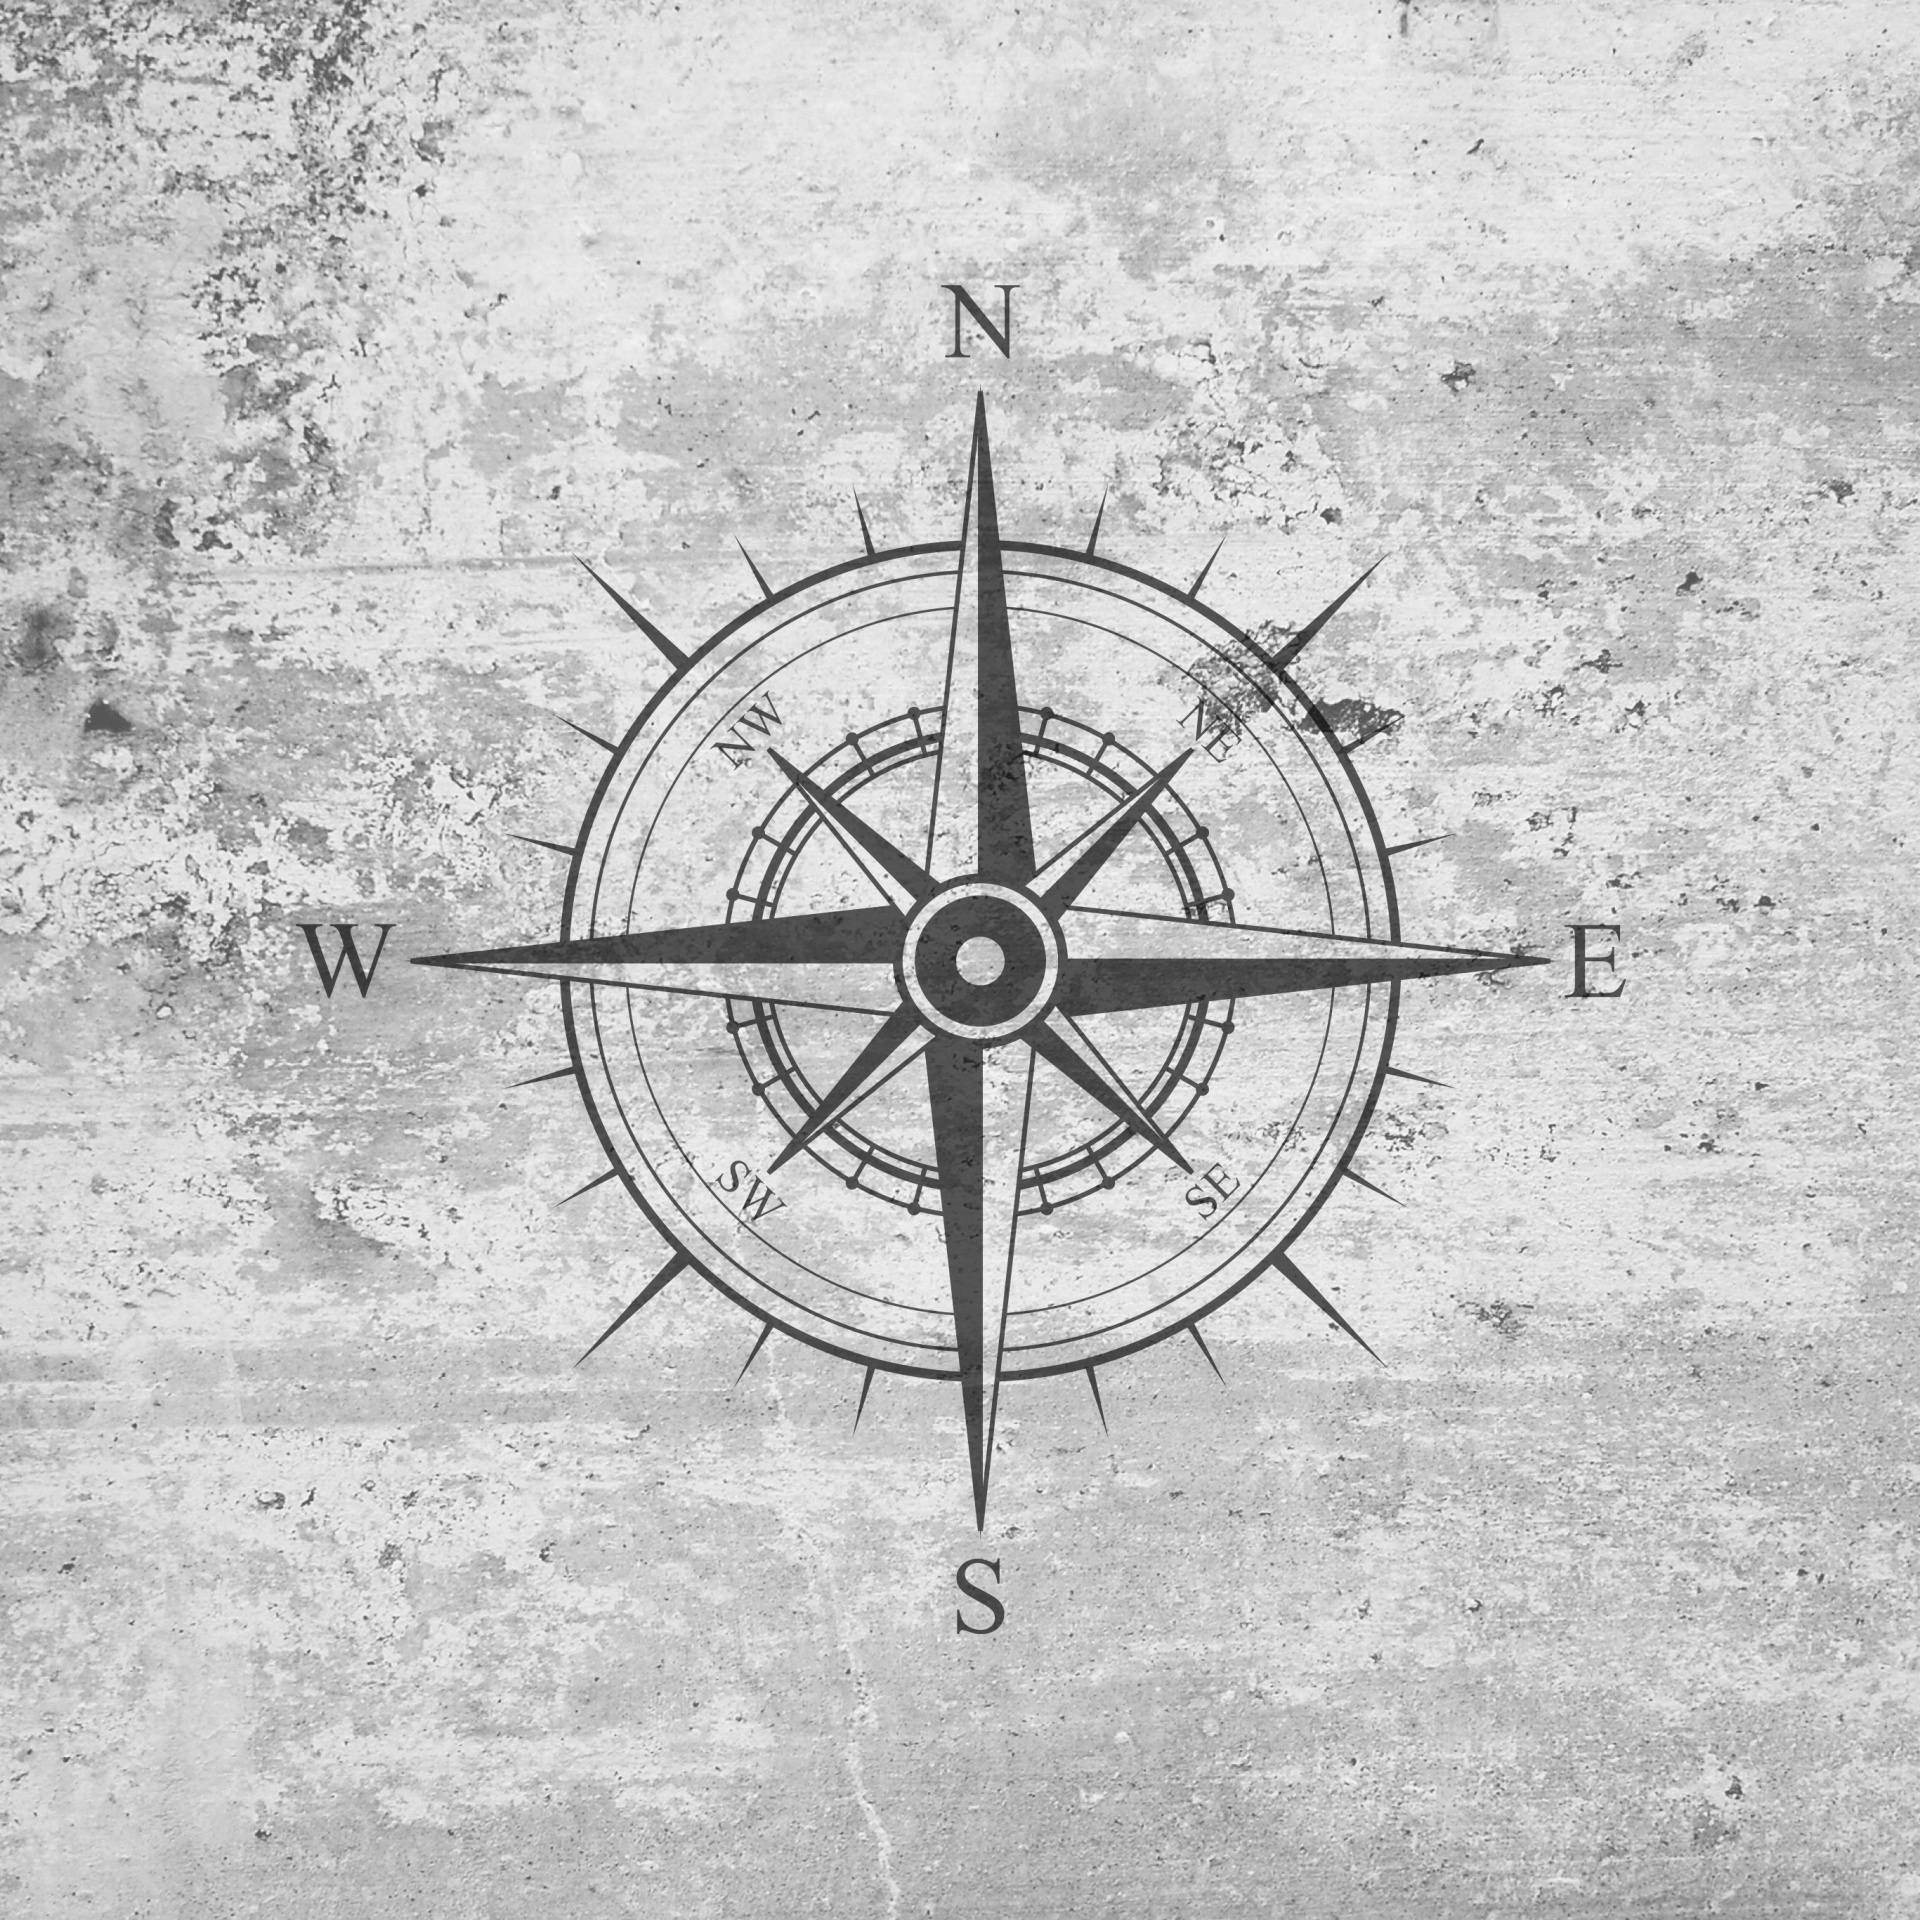 Compass rose on grunge vintage old concrete wall background